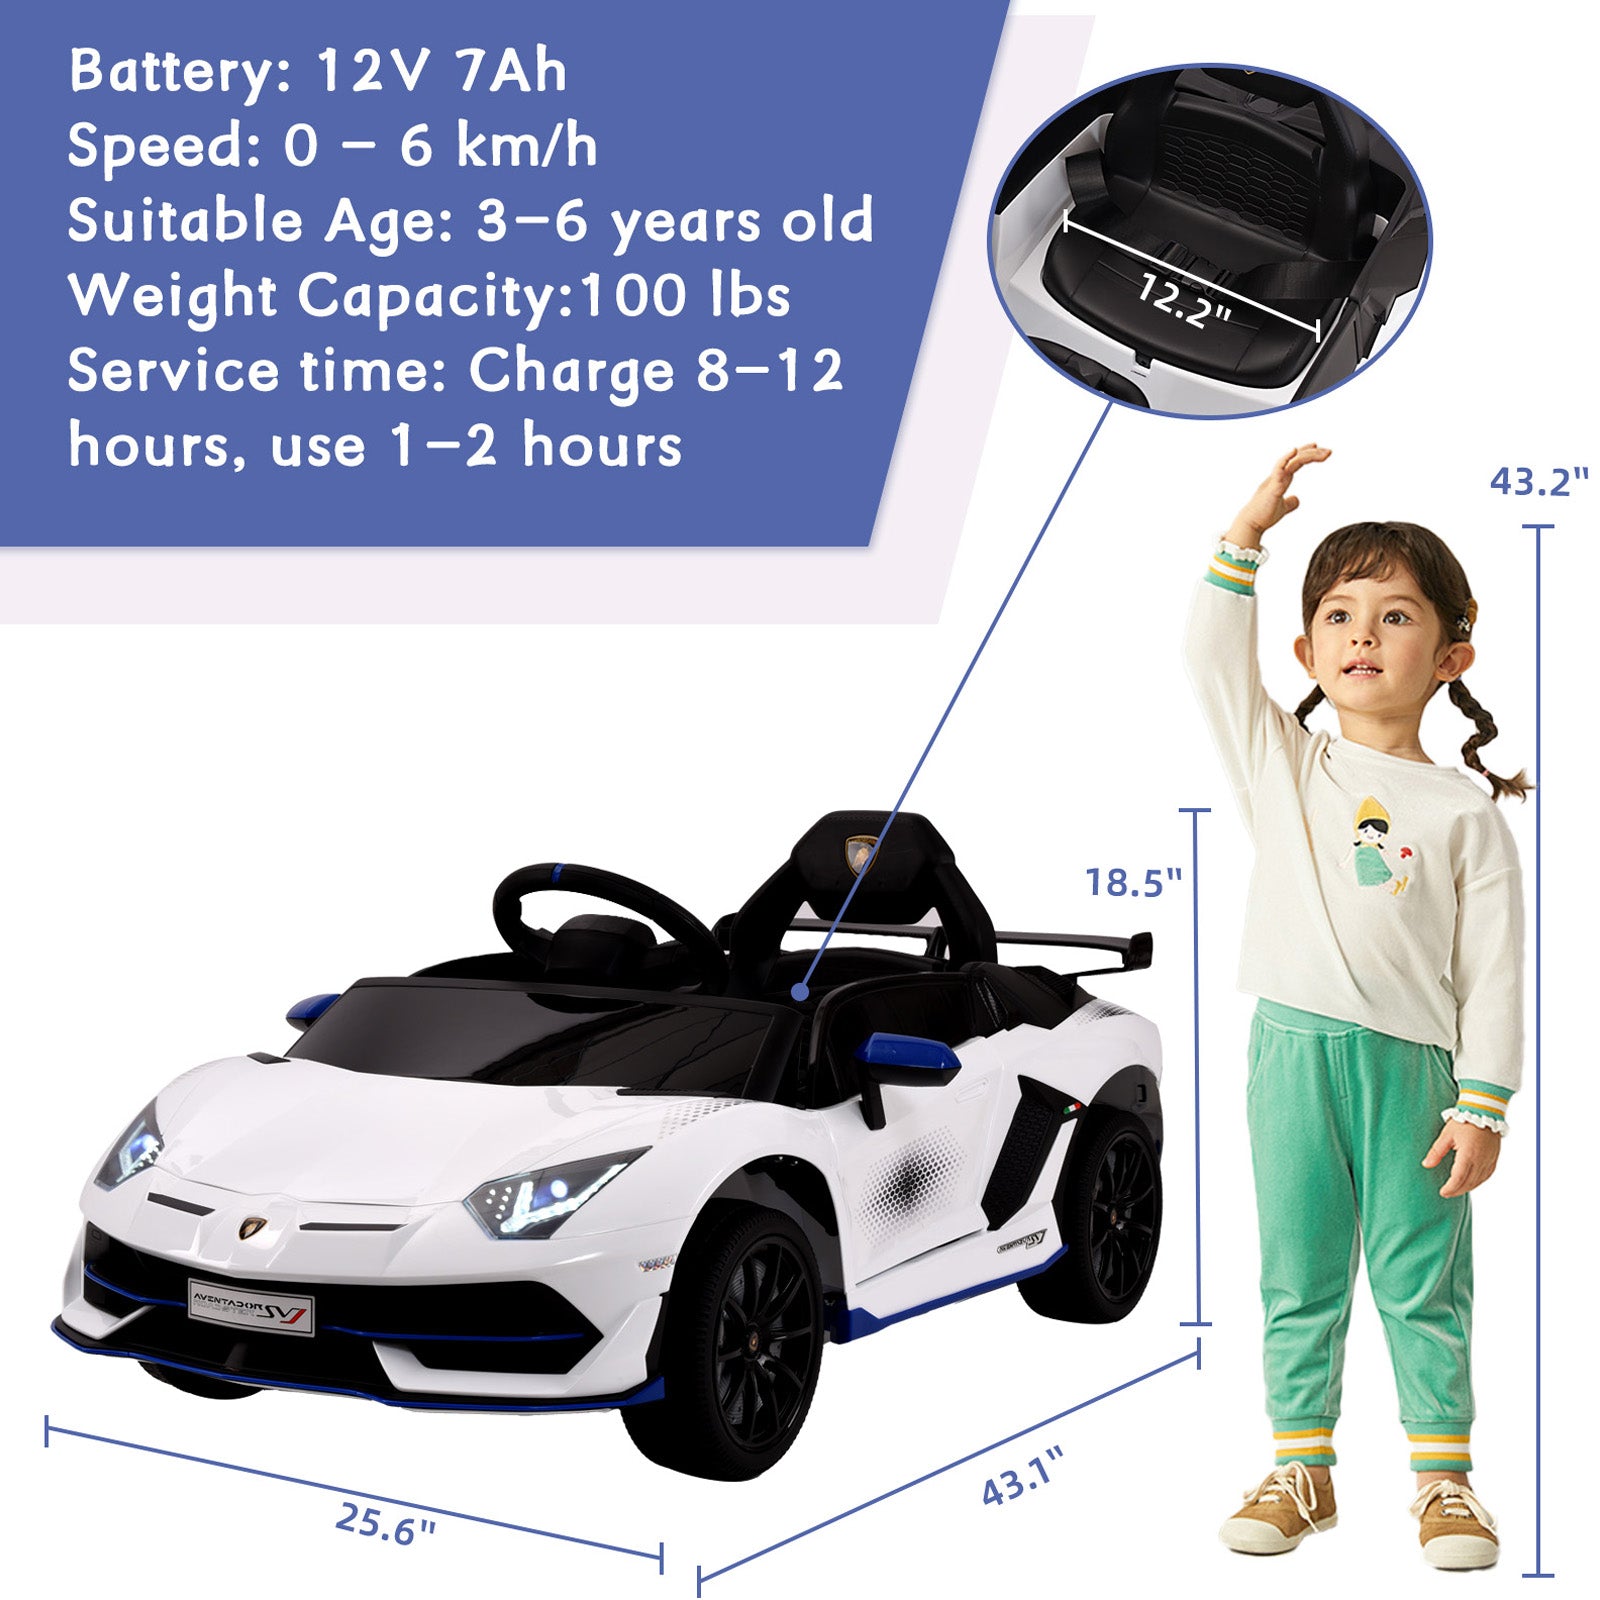 XJD 12V Kids Ride On Lamborghini Electric Car Power Wheels Battery Operated Vehicles Speeds Adjustable with Music, Parent Remote Control, Spring Suspension, White